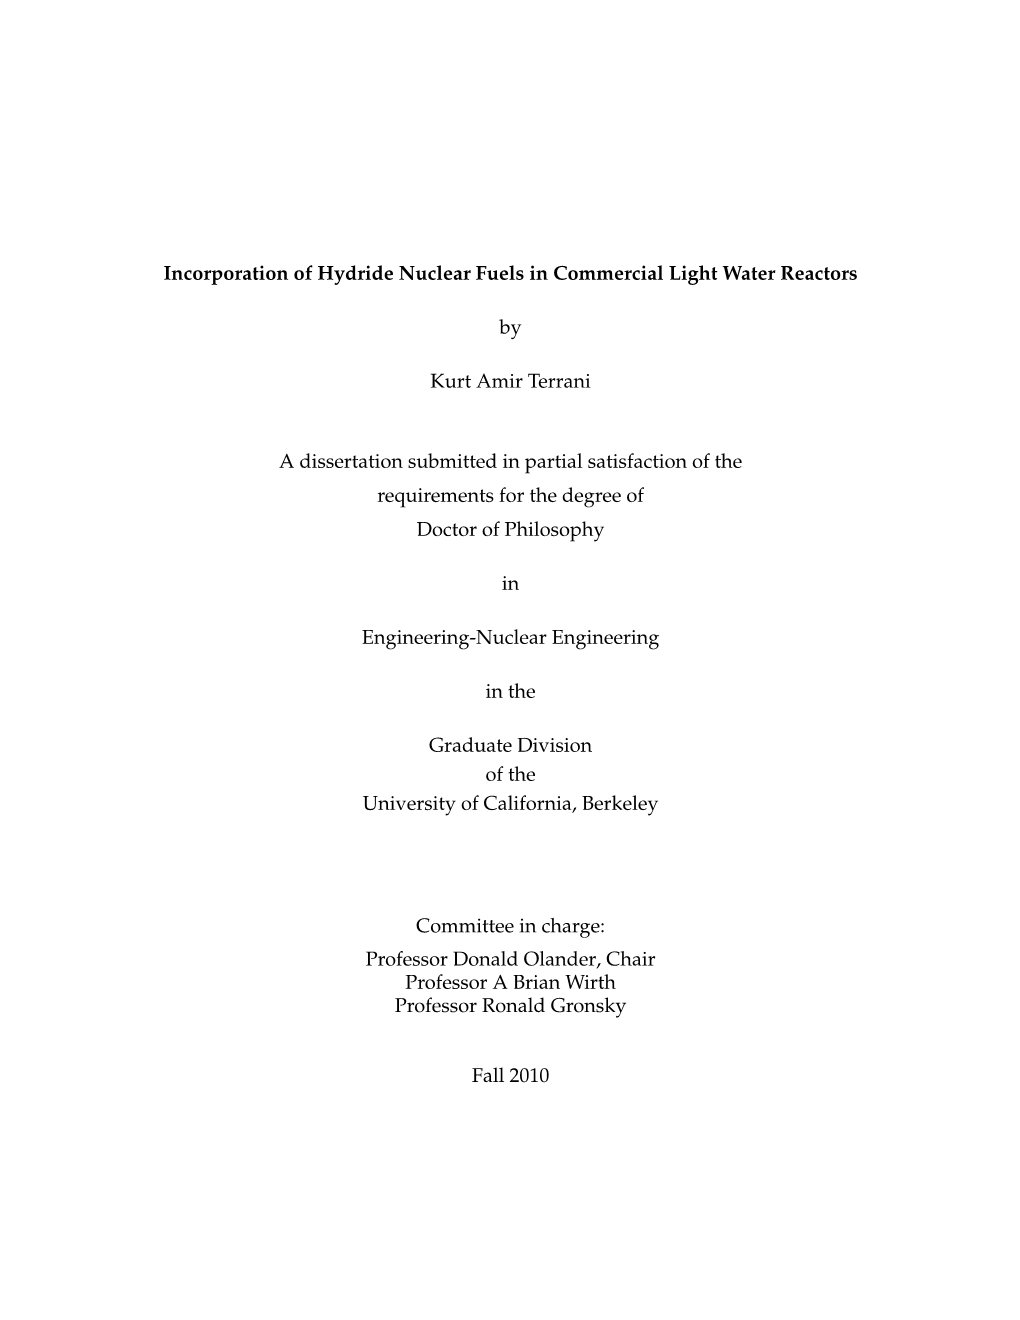 Incorporation of Hydride Nuclear Fuels in Commercial Light Water Reactors